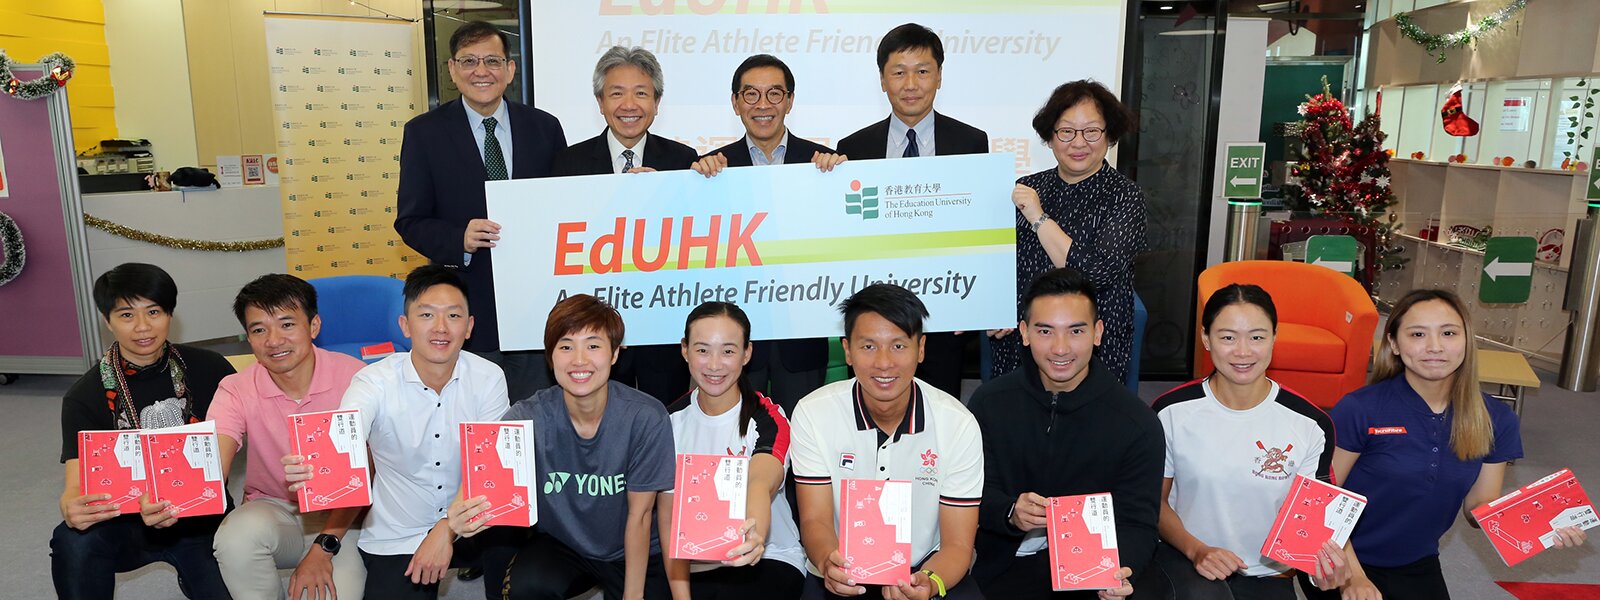 Book Launch of Dual Career Pathway of Elite Athletes